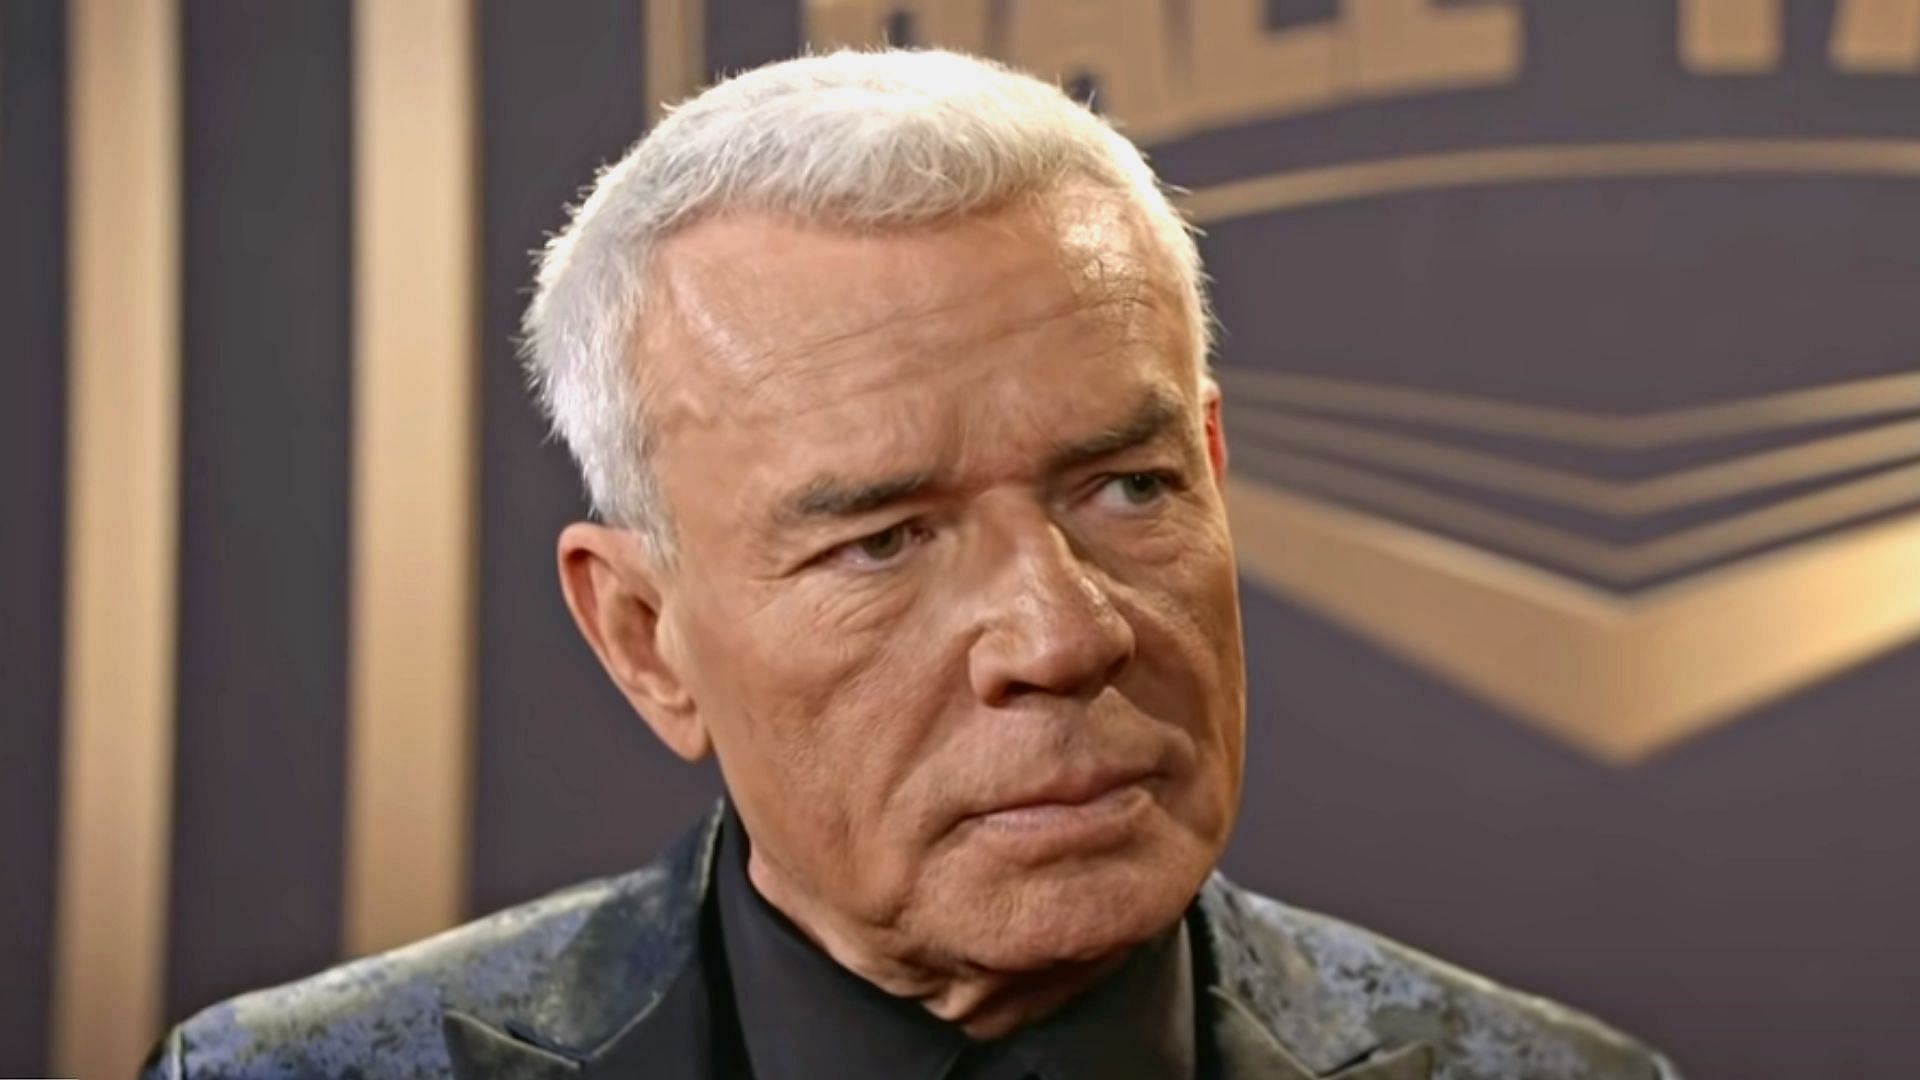 Eric Bischoff stayed with former WWE Champion when he was at his lowest